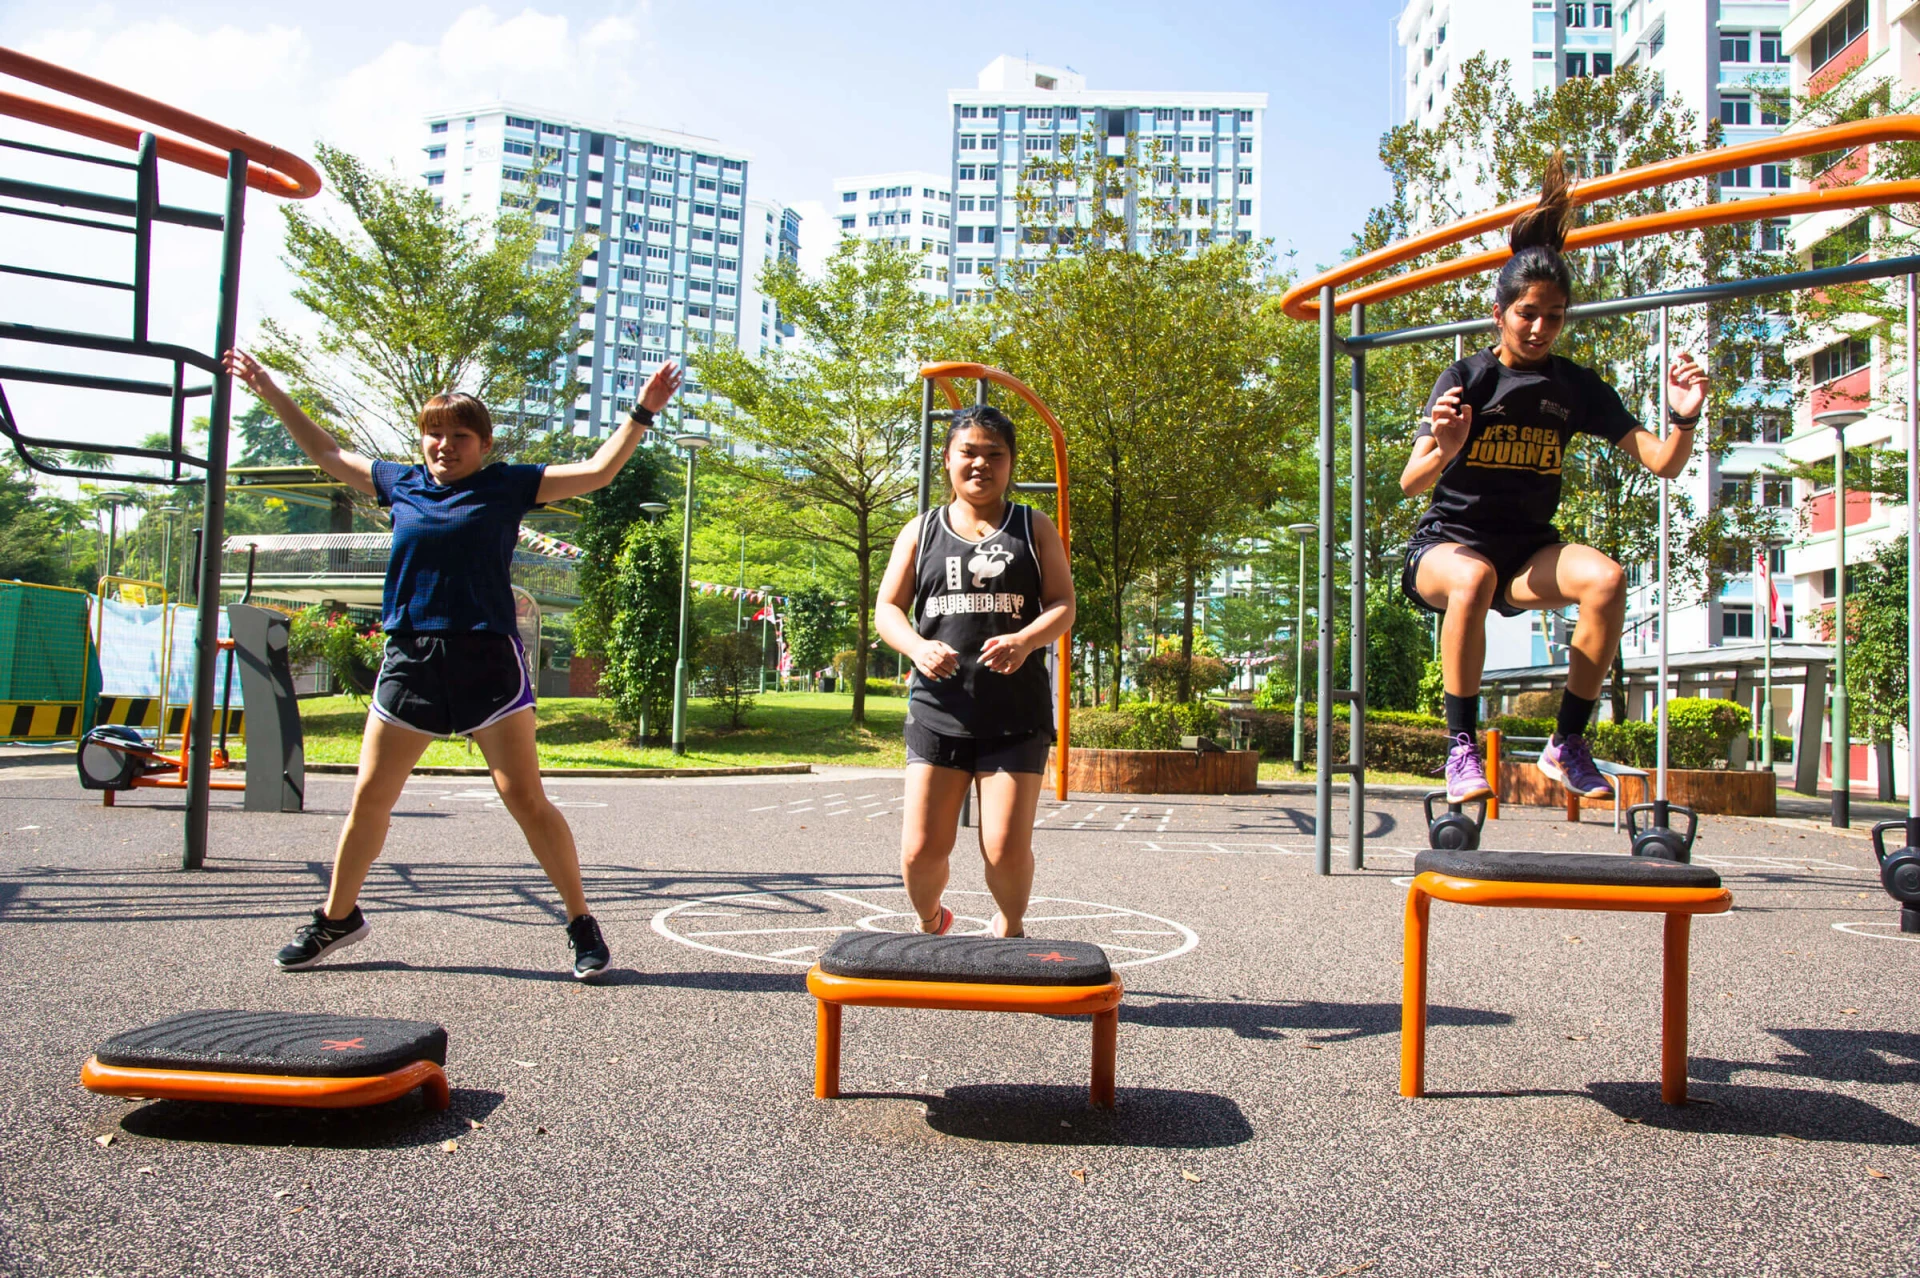 women working out together at outdoor fitness site in Singapore